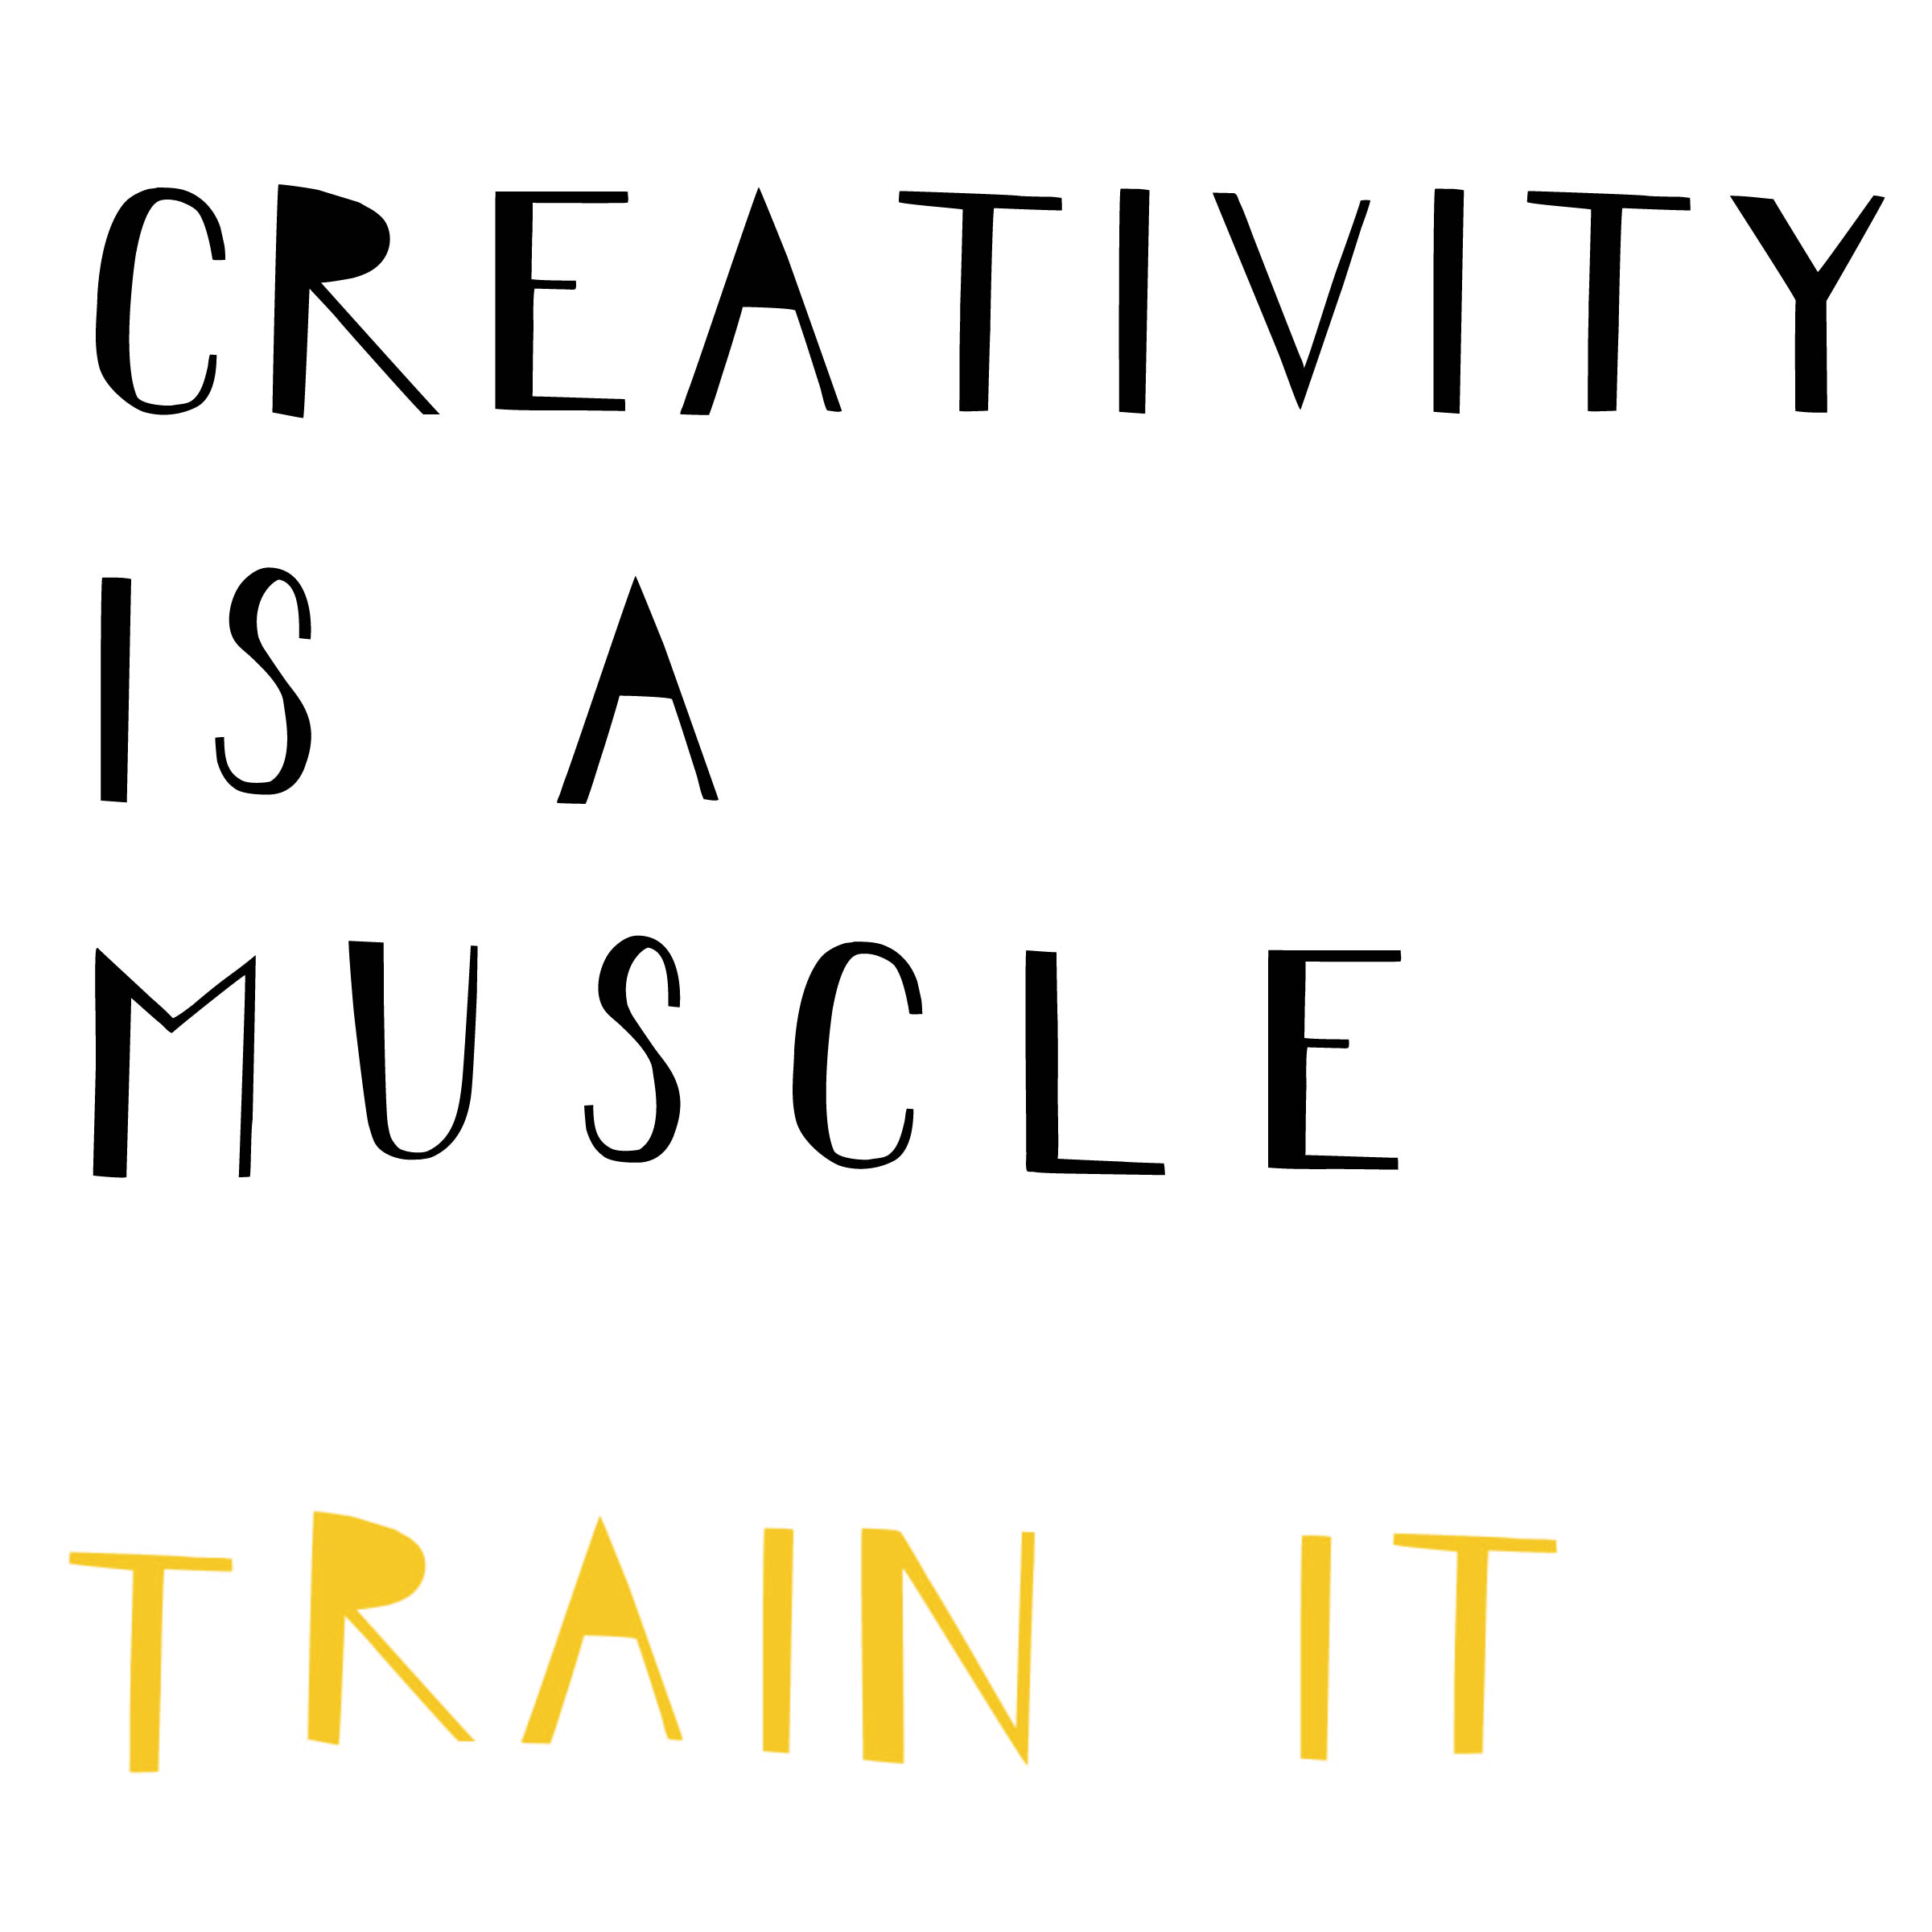 Creativity Quotes Creativity is a Muscle Train It Yellow